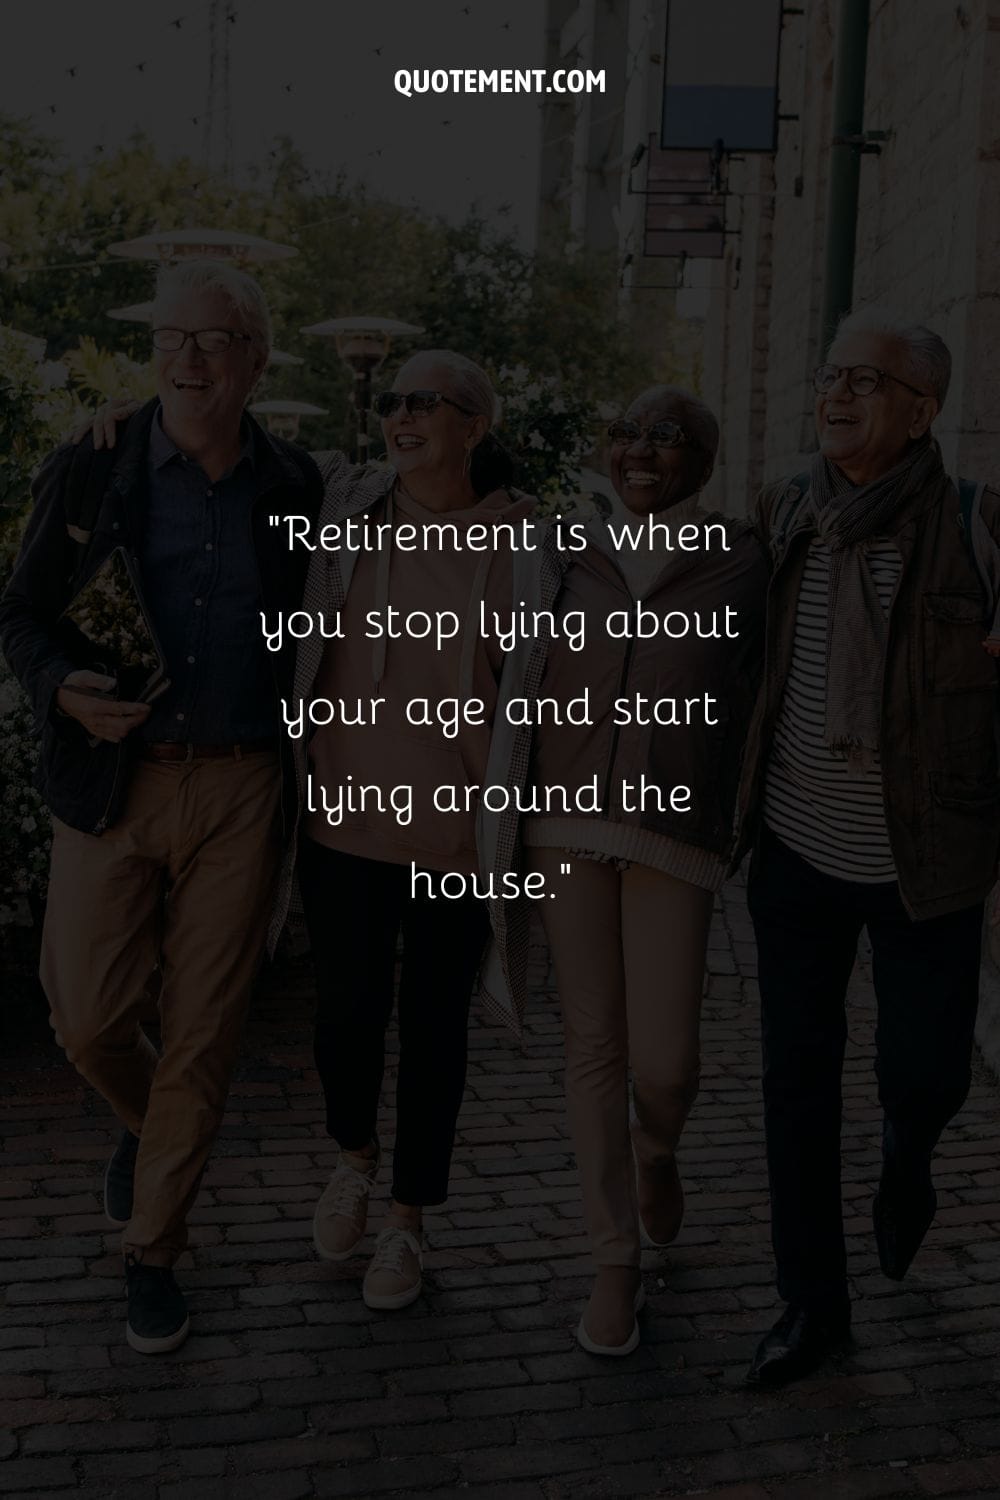 Elderly duos, fashionable and looking good, representing happy retirement funny quote